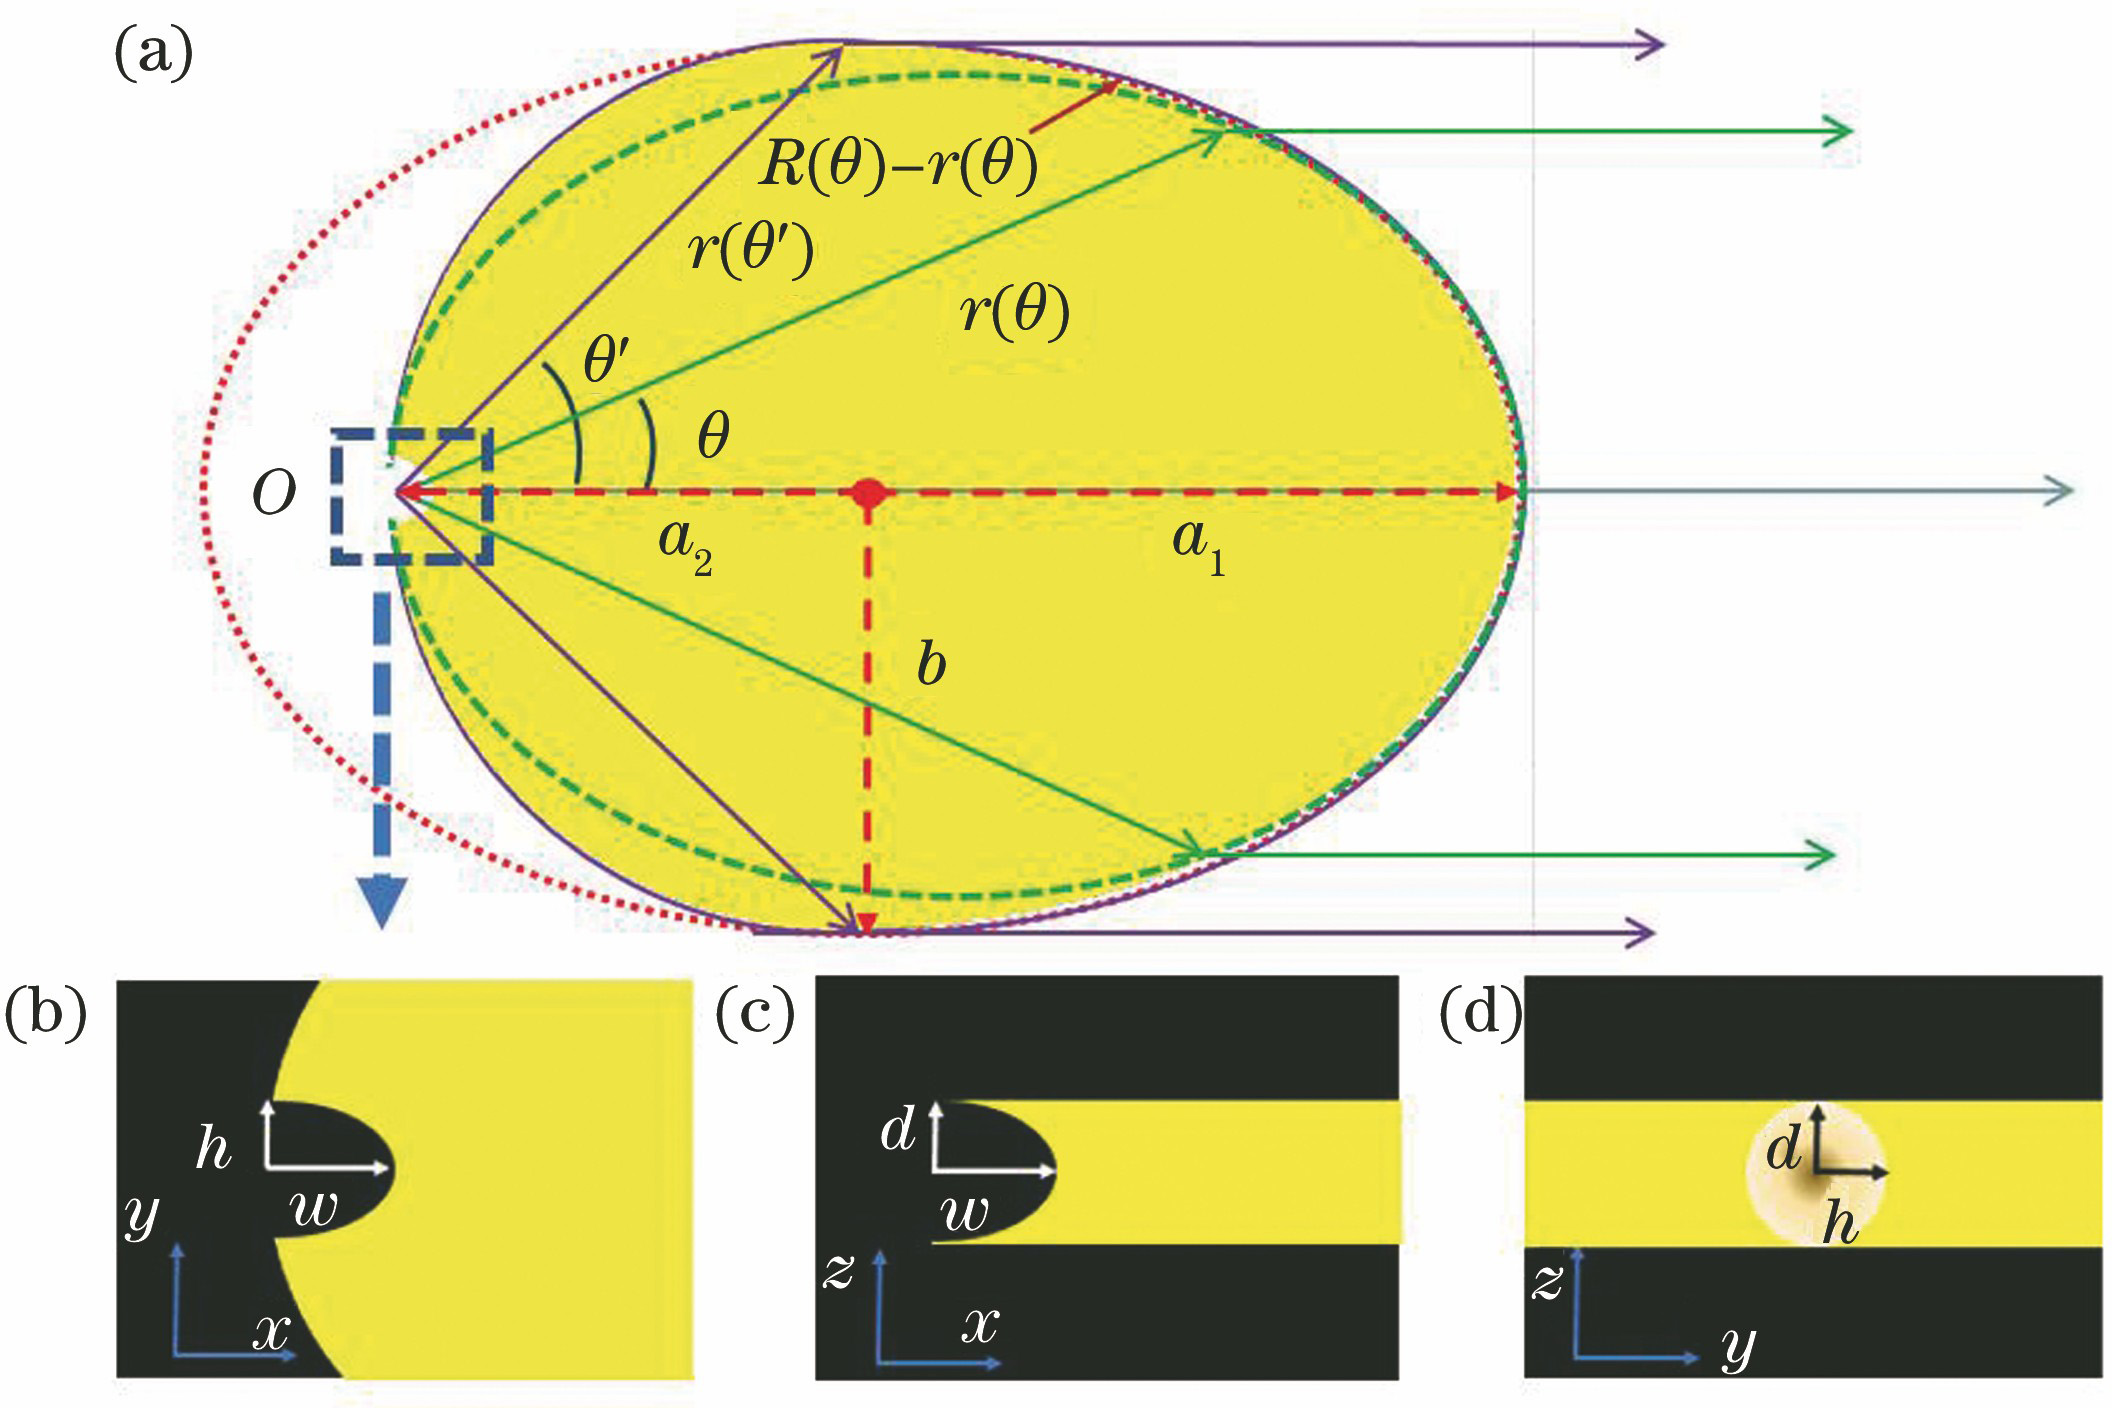 Schematic and projection views of a whispering-gallery-mode oval microdisk. (a) Schematic view of a whispering-gallery-mode oval microdisk and a symmetric elliptical microdisk with a notch; (b)—(d) projections of notch on xy, xz, and yz plane, respectively